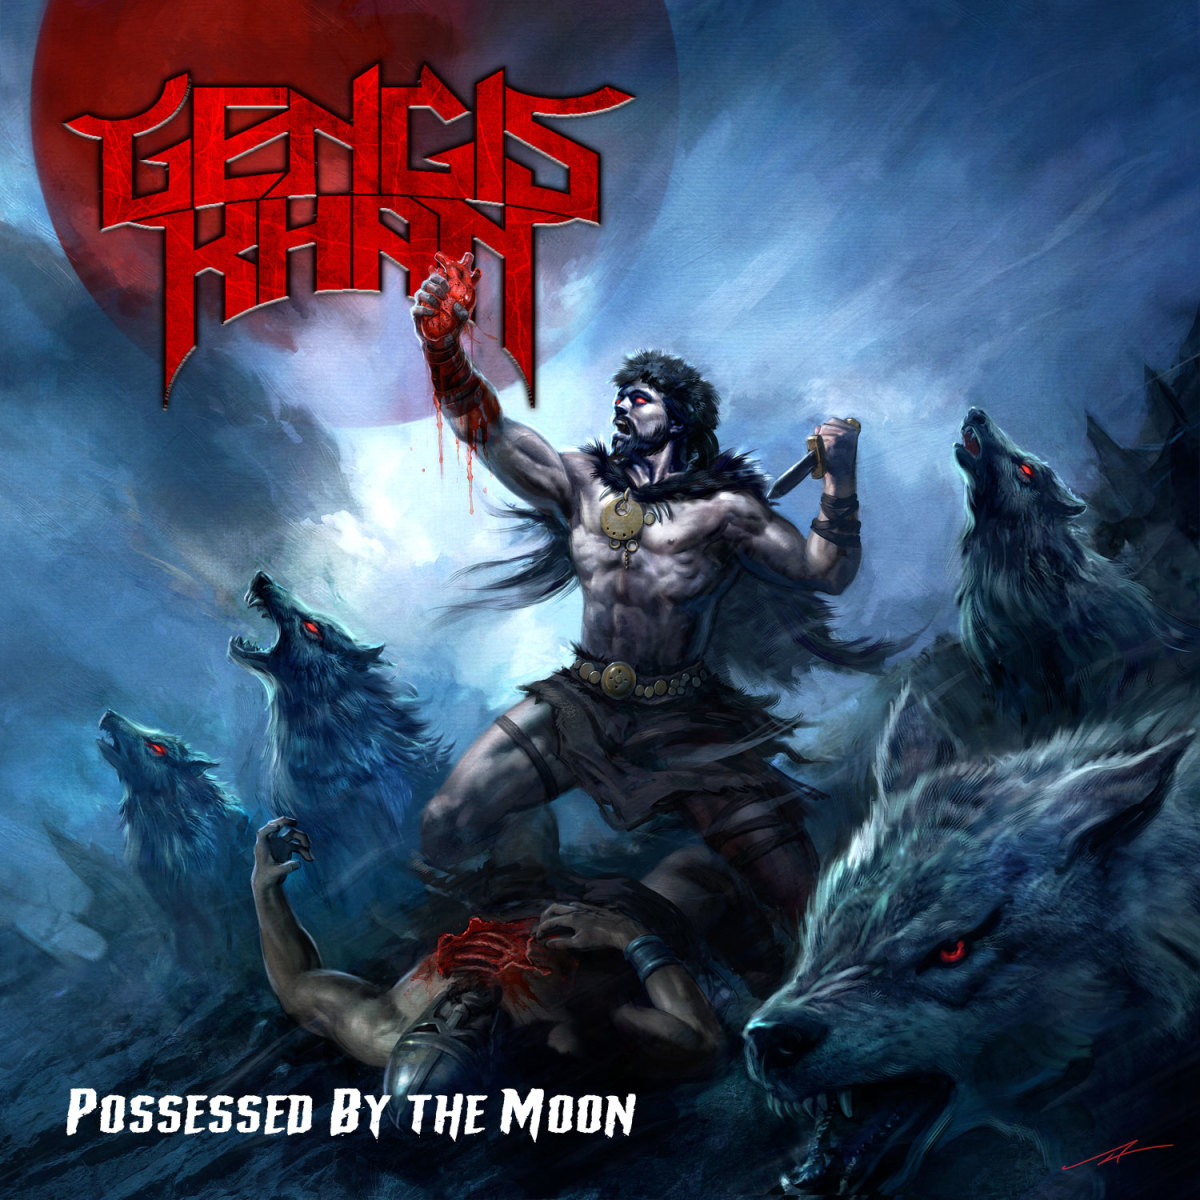 gengis-khan-possessed-by-the-moon-album-review